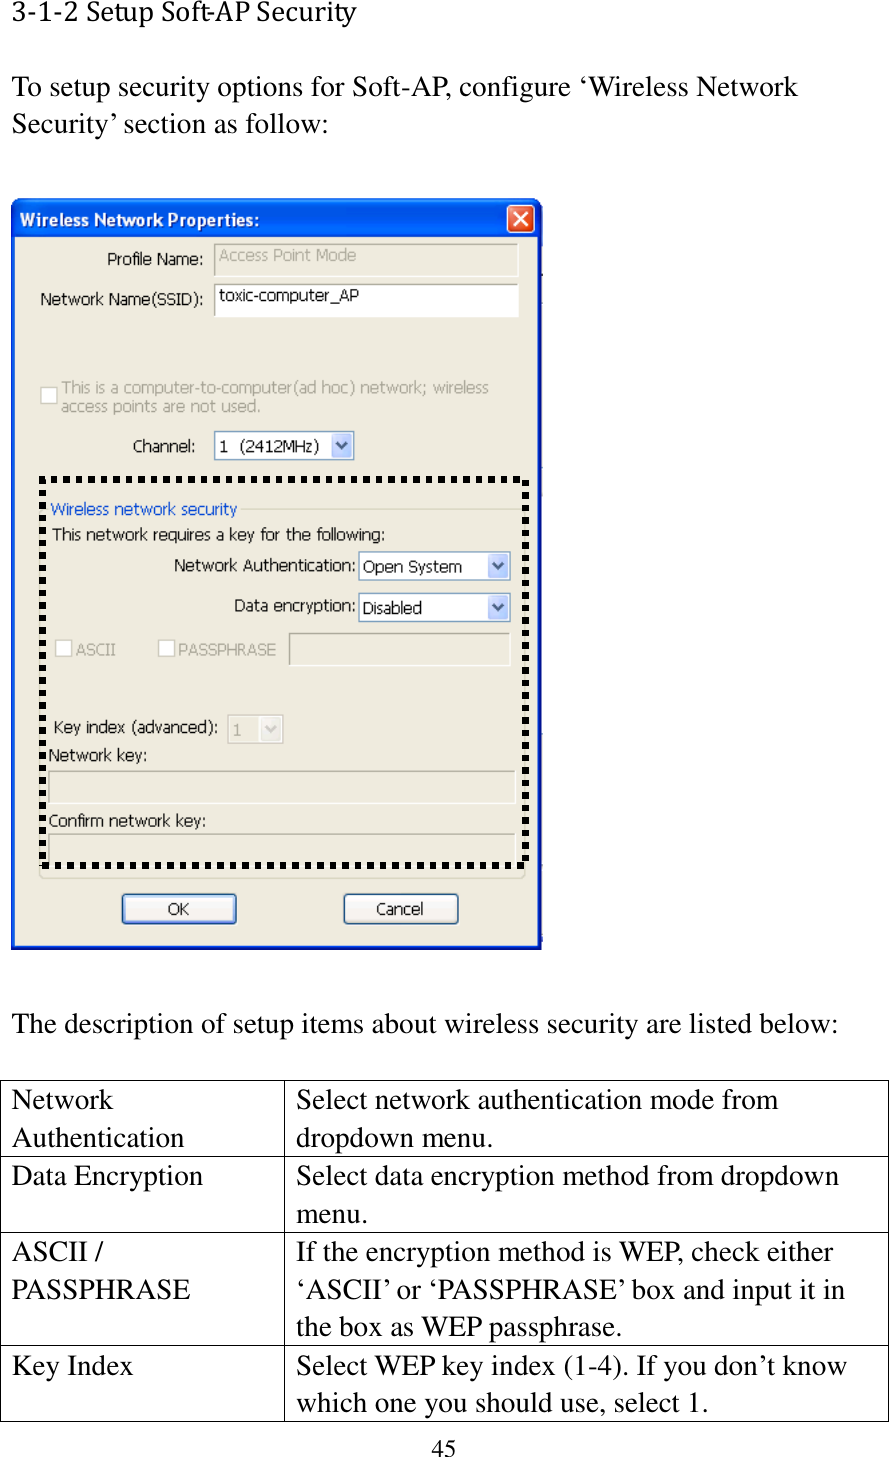 45  3-1-2 Setup Soft-AP Security  To setup security options for Soft-AP, configure ‘Wireless Network Security’ section as follow:    The description of setup items about wireless security are listed below:  Network Authentication Select network authentication mode from dropdown menu. Data Encryption Select data encryption method from dropdown menu. ASCII / PASSPHRASE If the encryption method is WEP, check either ‘ASCII’ or ‘PASSPHRASE’ box and input it in the box as WEP passphrase. Key Index Select WEP key index (1-4). If you don’t know which one you should use, select 1. 